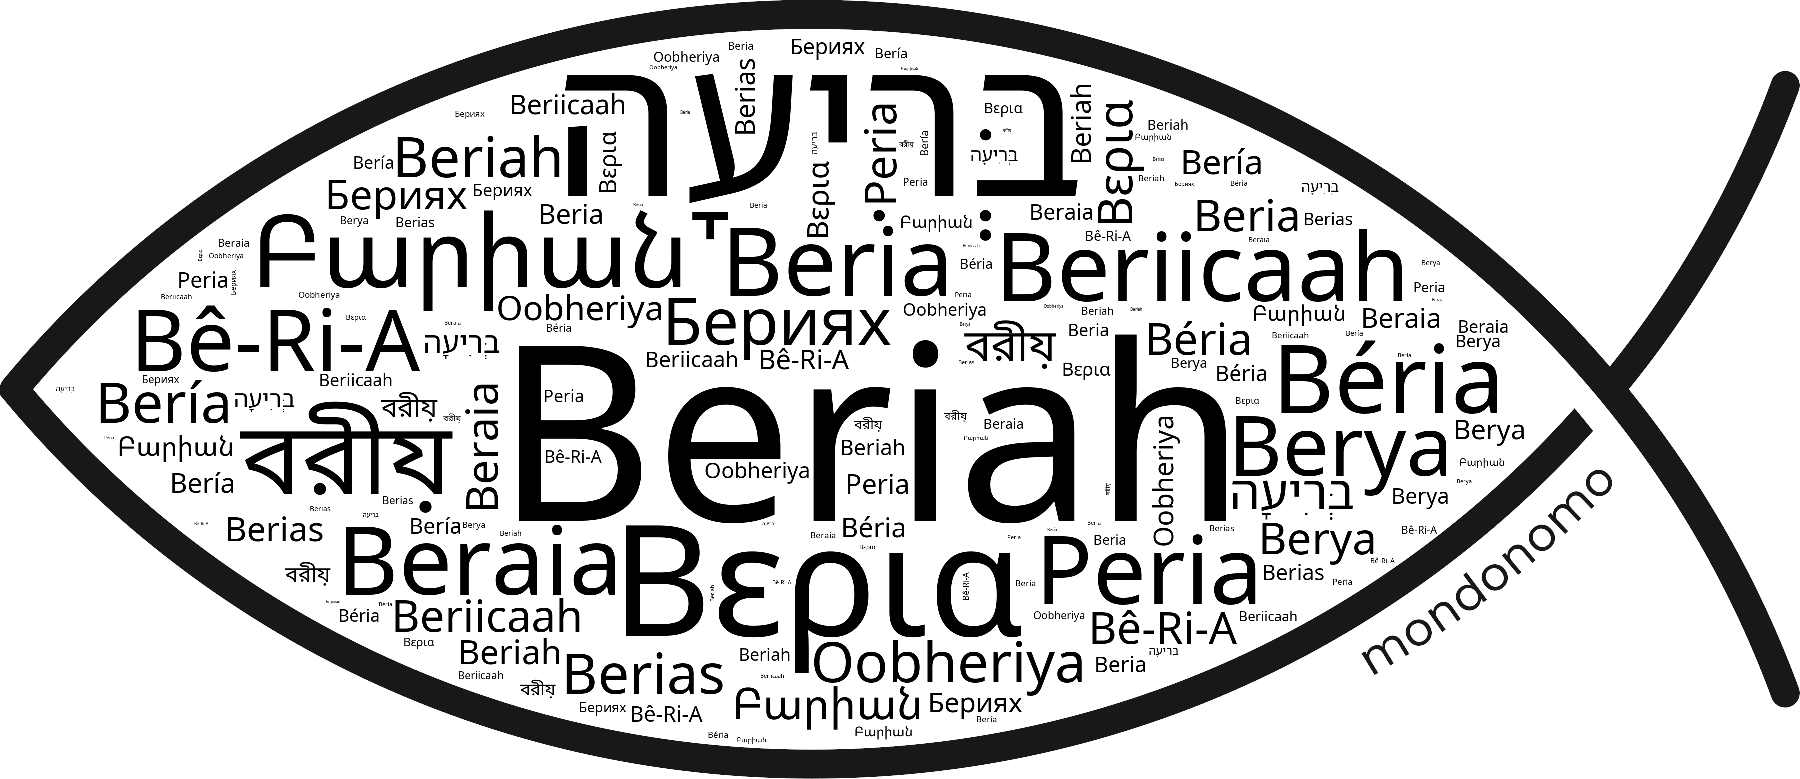 Name Beriah in the world's Bibles